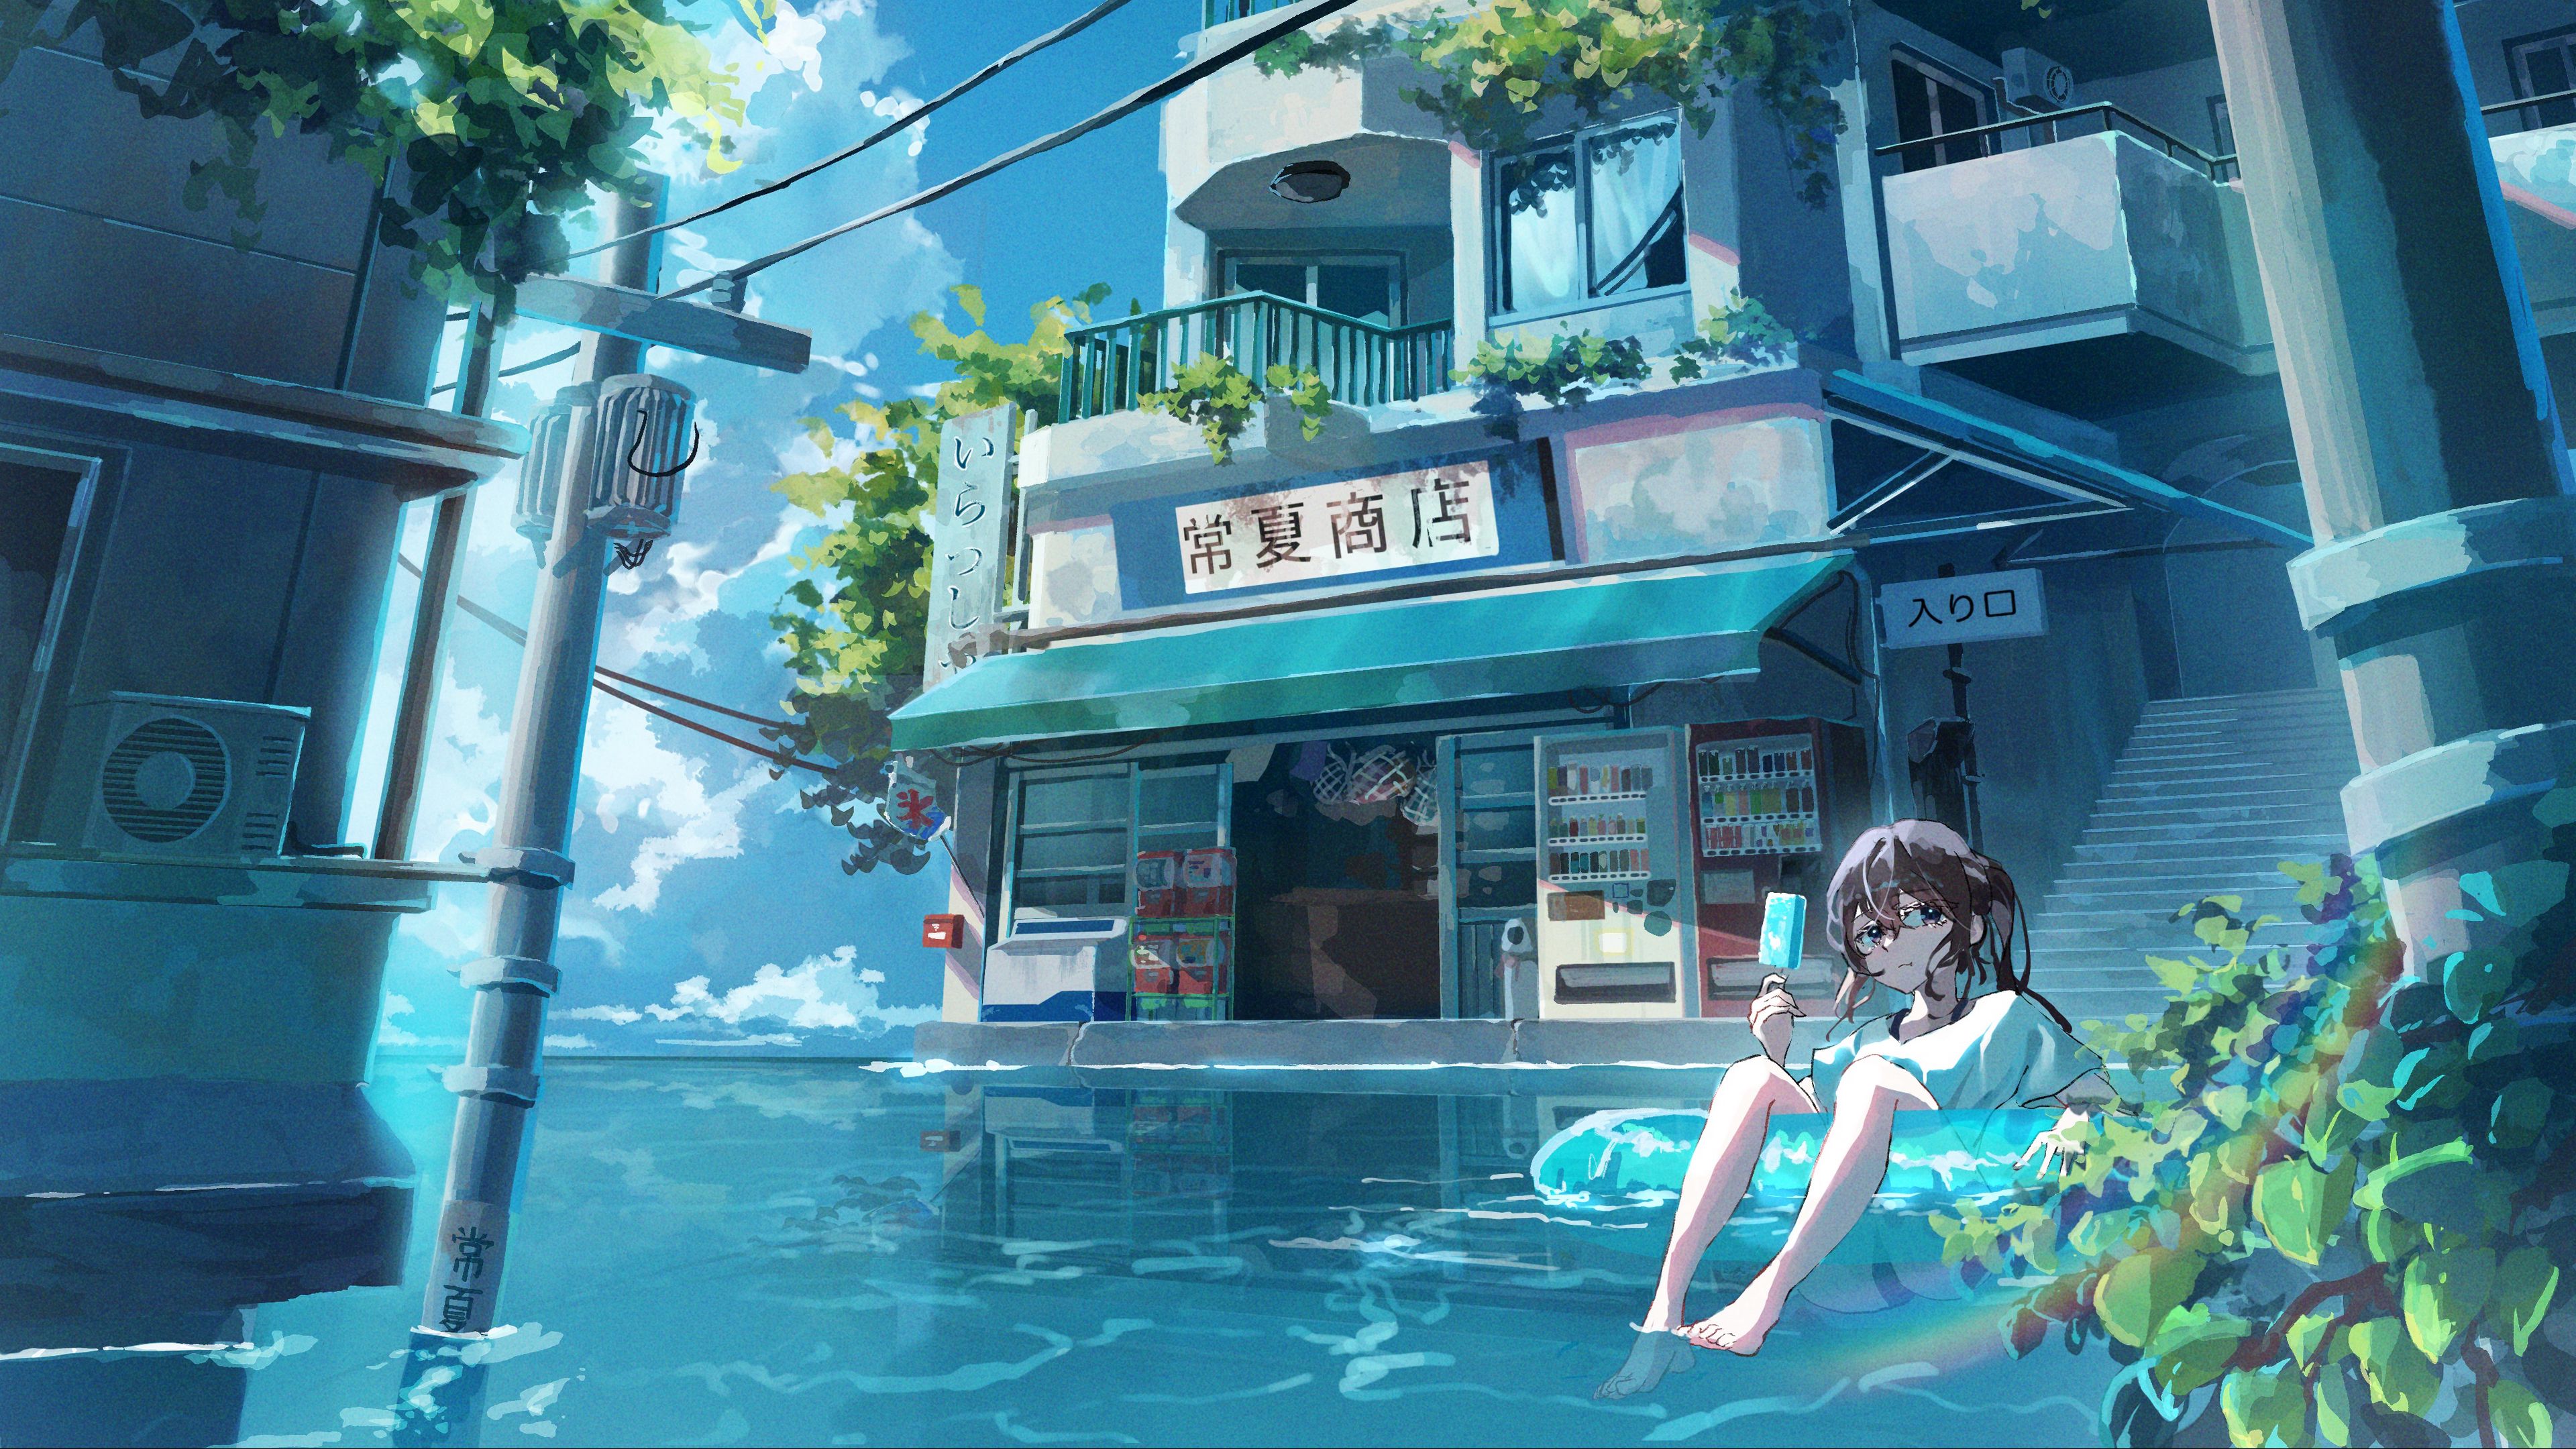 Download wallpaper 3840x2160 girl, ice cream, water, building, anime 4k uhd  16:9 hd background